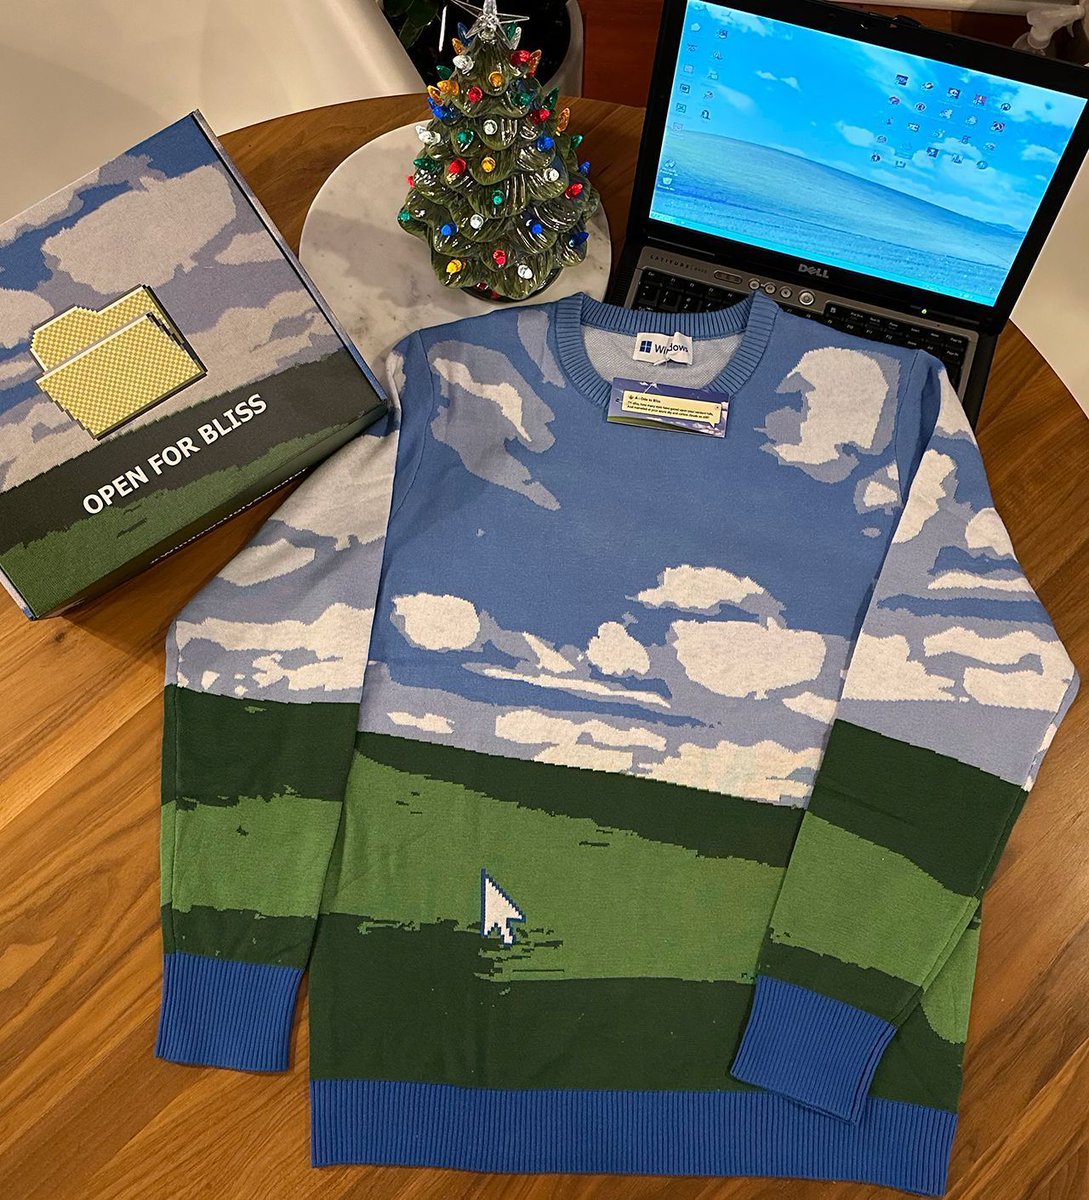 Just got an early holiday gift from @Windows! Check out this amazing, nostalgic ugly sweater they sent over. Loving the bliss vibes! #WindowsXP #WindowsUglySweater